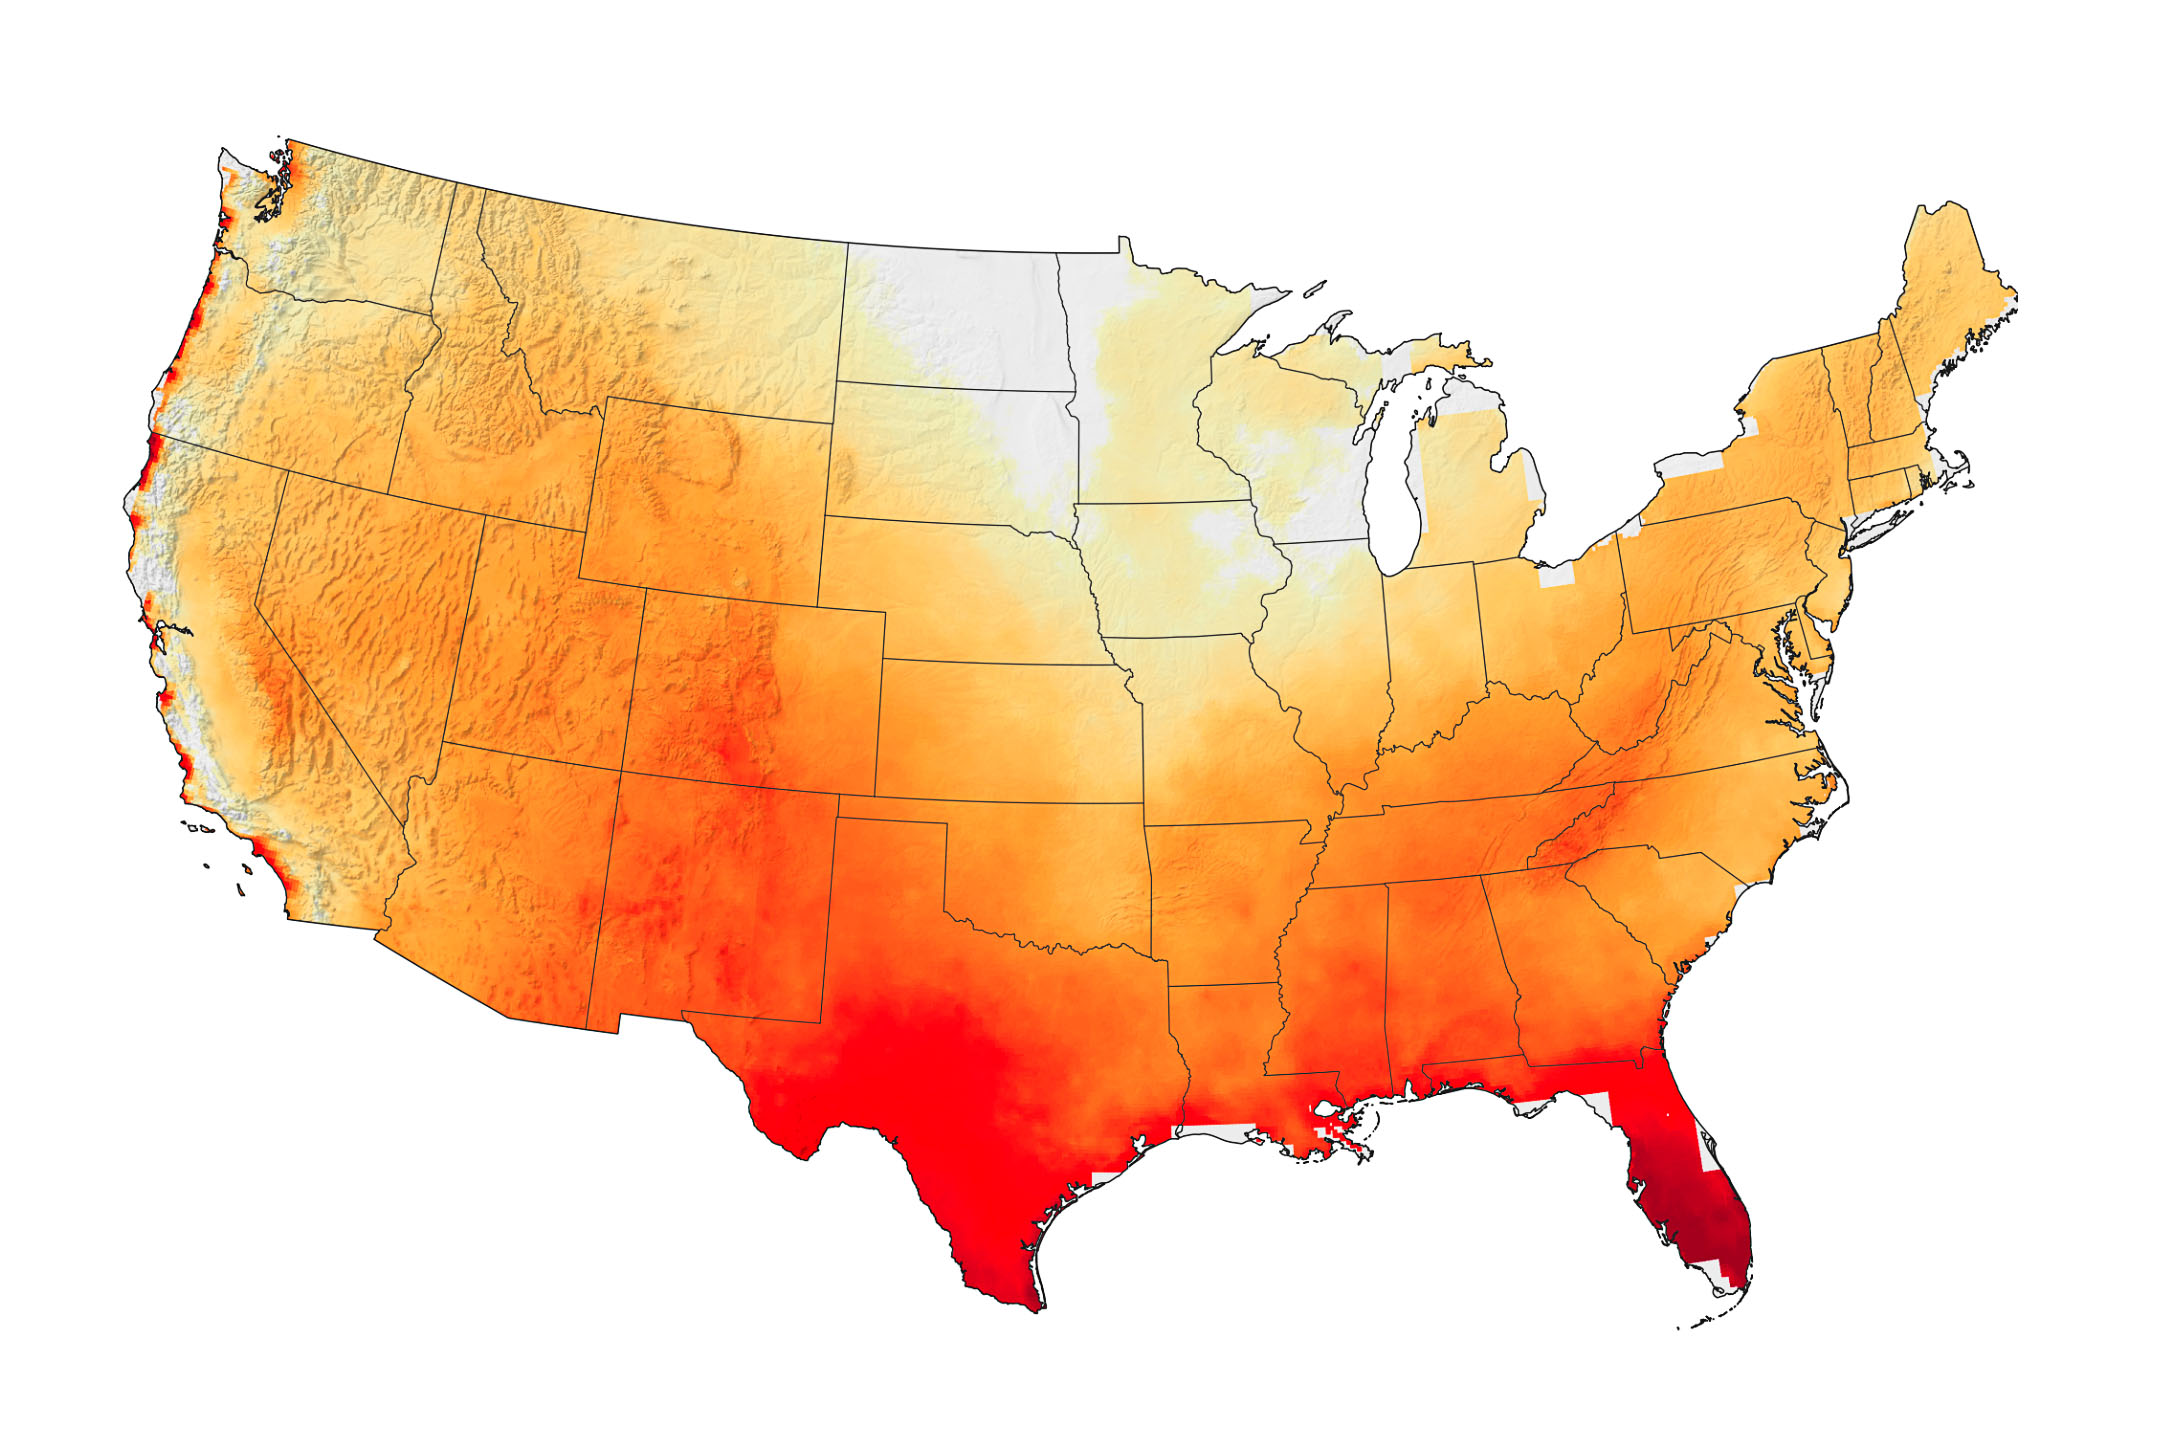 Mapping a Century of Rising Heat